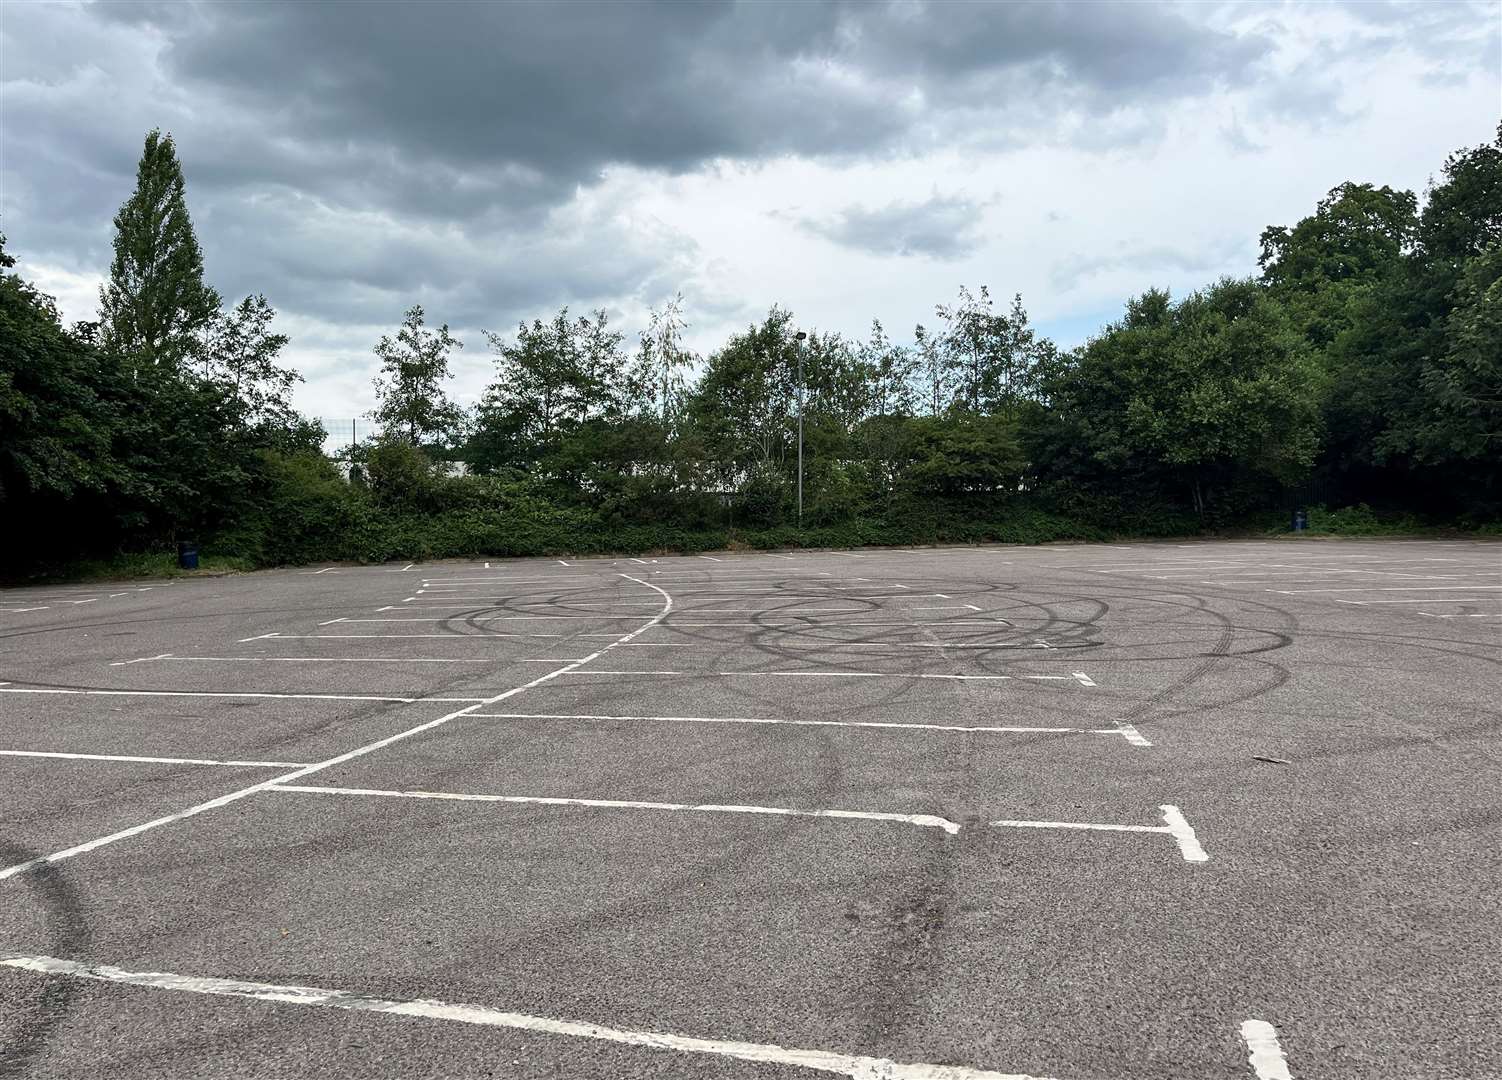 Tyre marks have been left in the car park